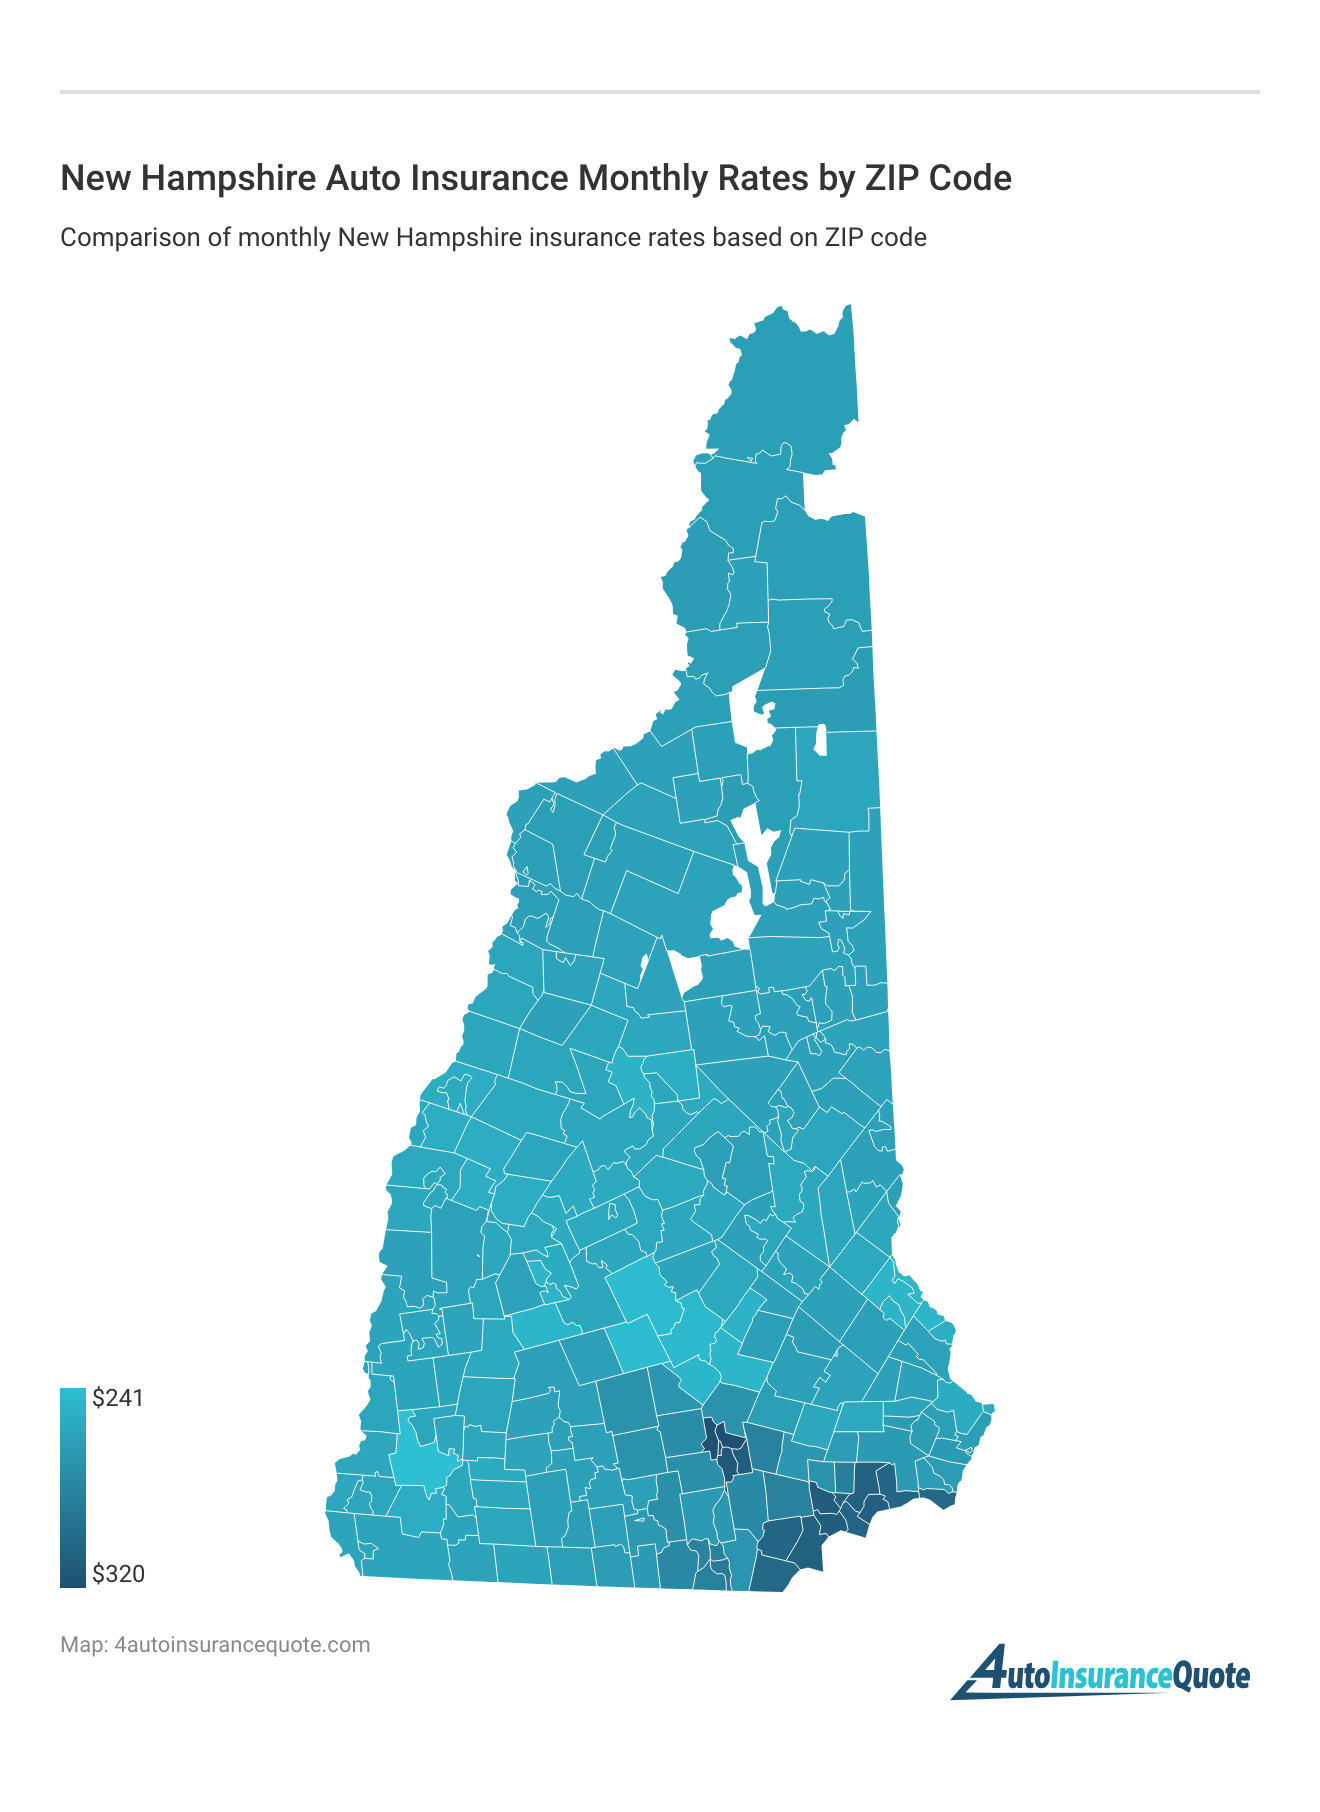 <h3>New Hampshire Auto Insurance Monthly Rates by ZIP Code</h3>